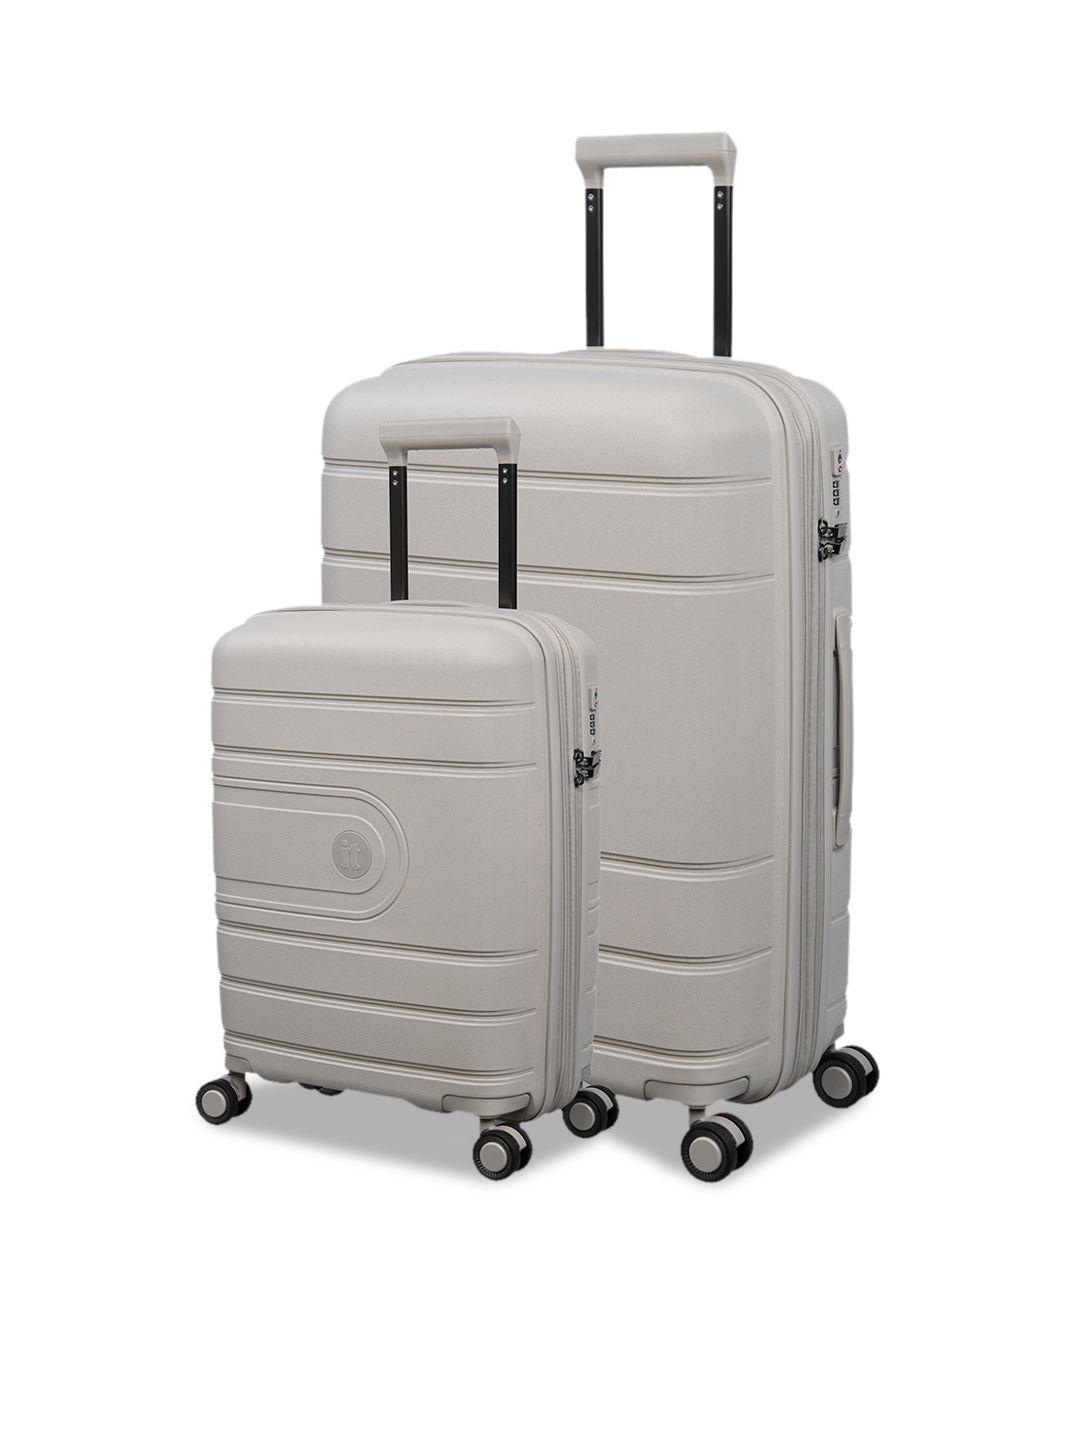 it luggage set of 2 beige textured large hard-sided trolley suitcase